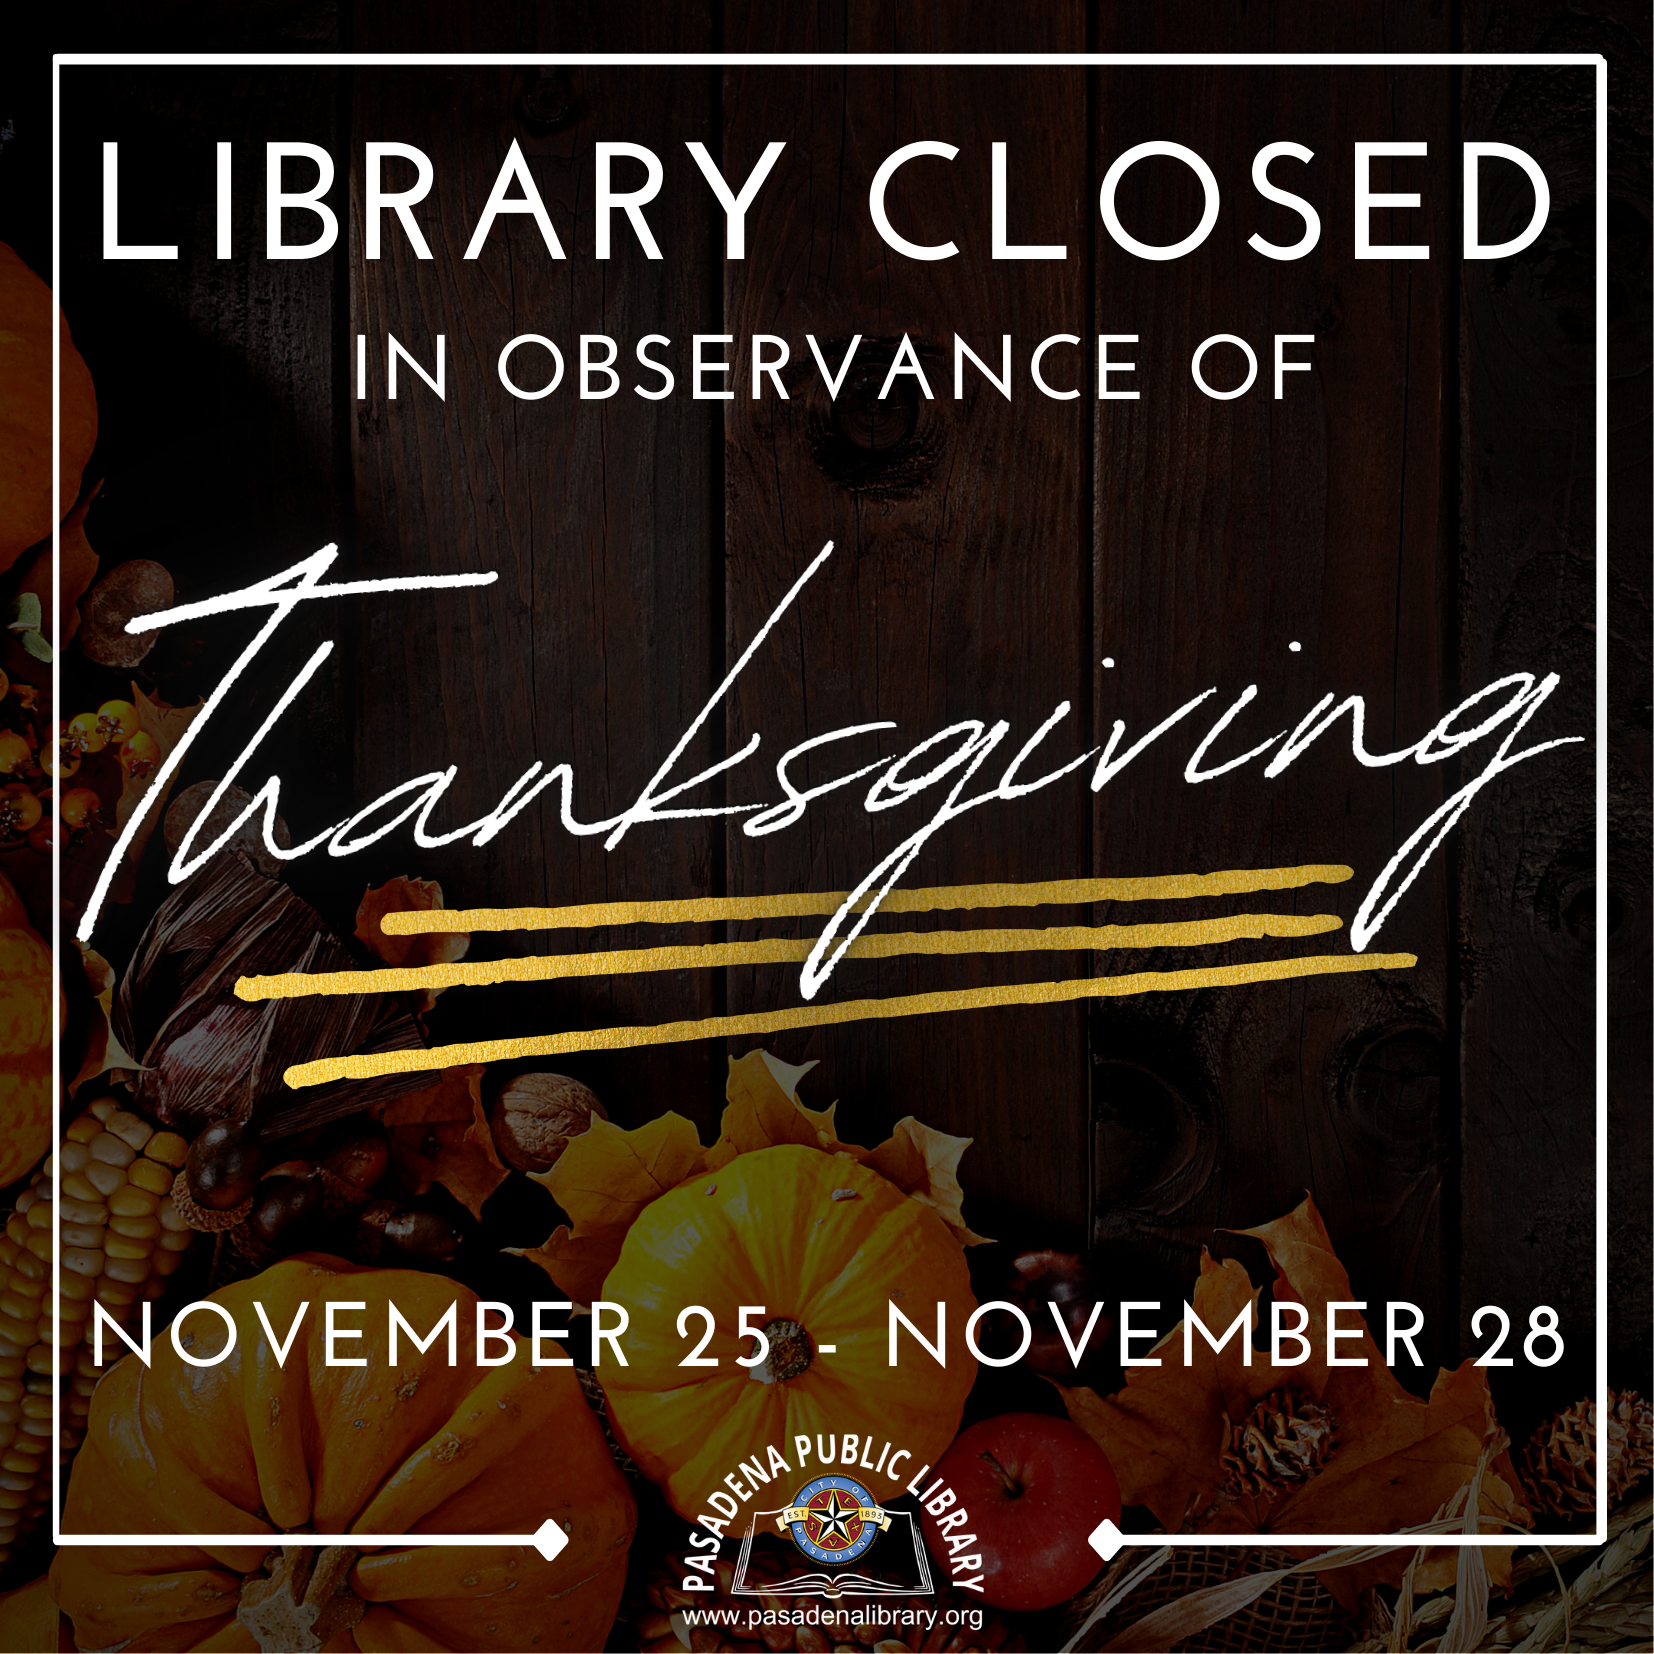 The Pasadena Public Library will be CLOSED Thursday, November 25 through Sunday, November 28 in observance of THANKSGIVING! Library locations will re-open on Monday, November 29 at 10:00AM.